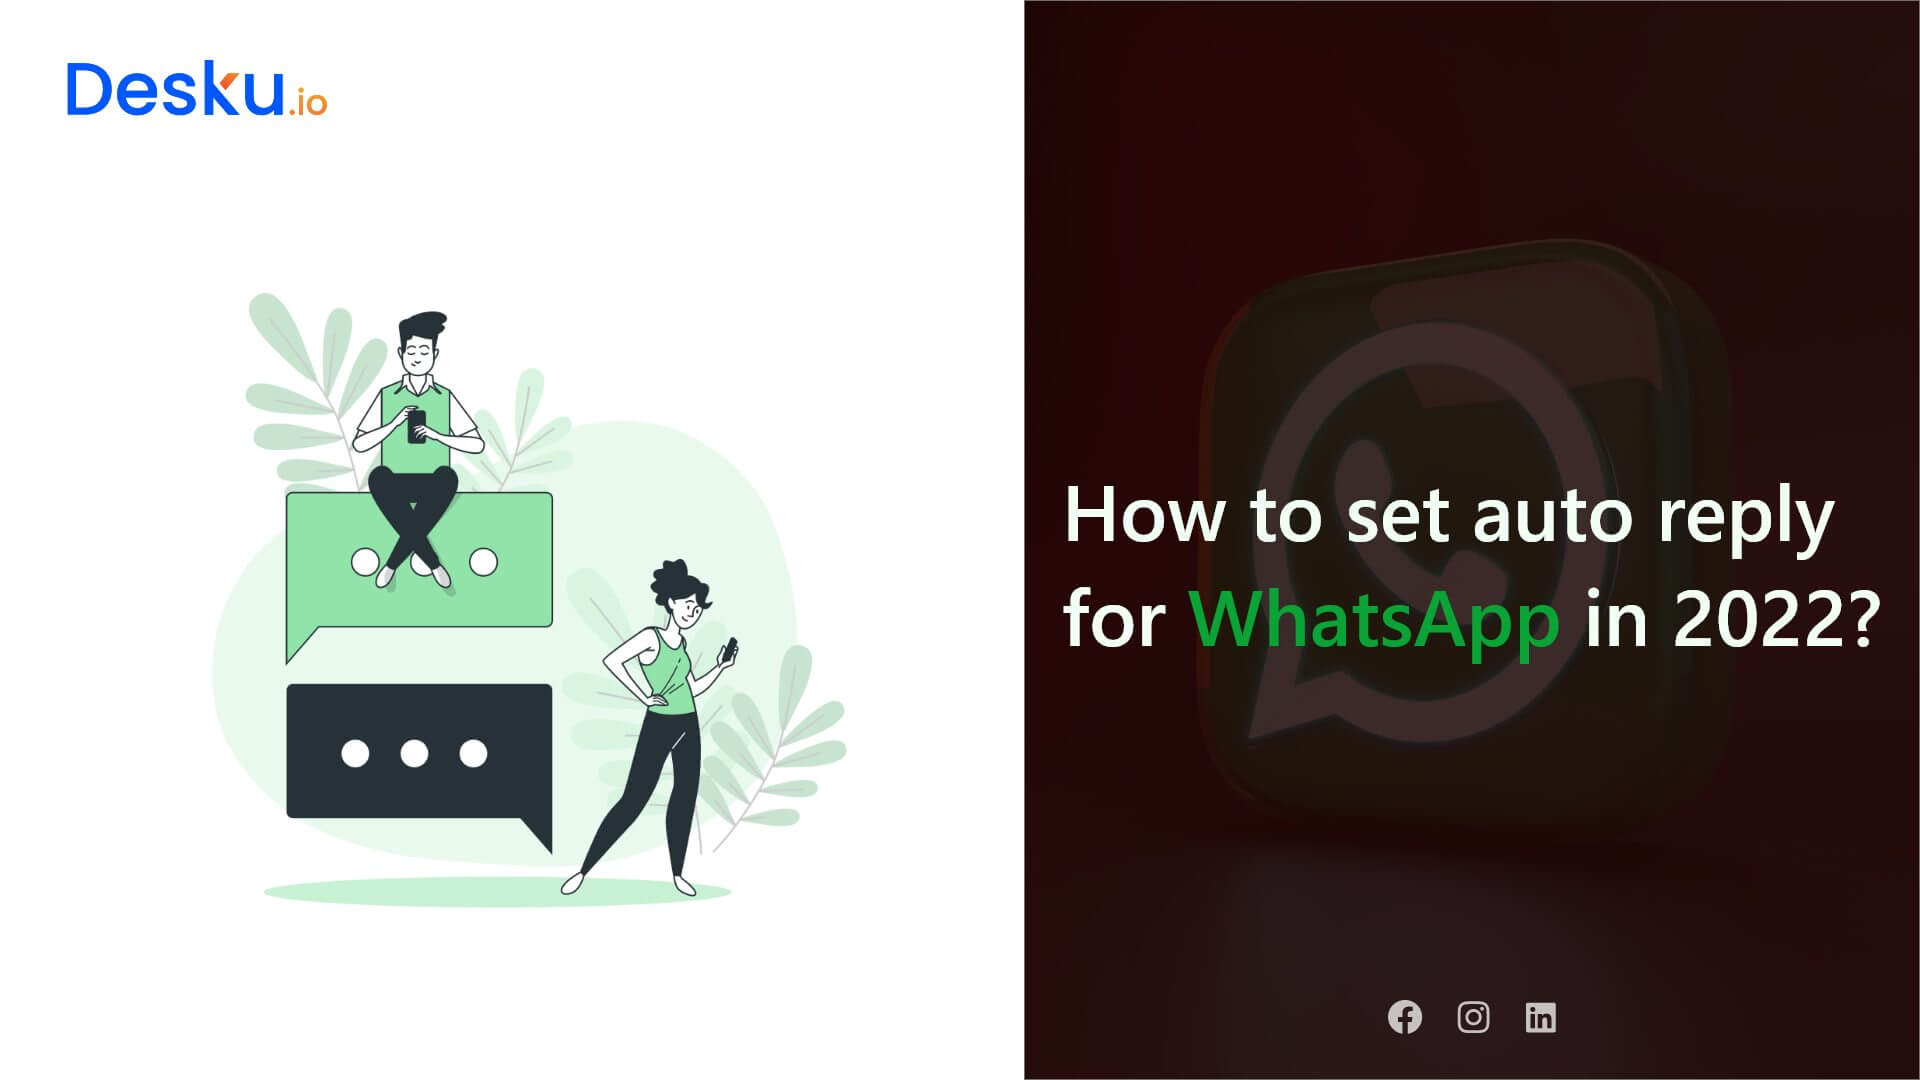 How to set auto reply for whatsapp in 2022